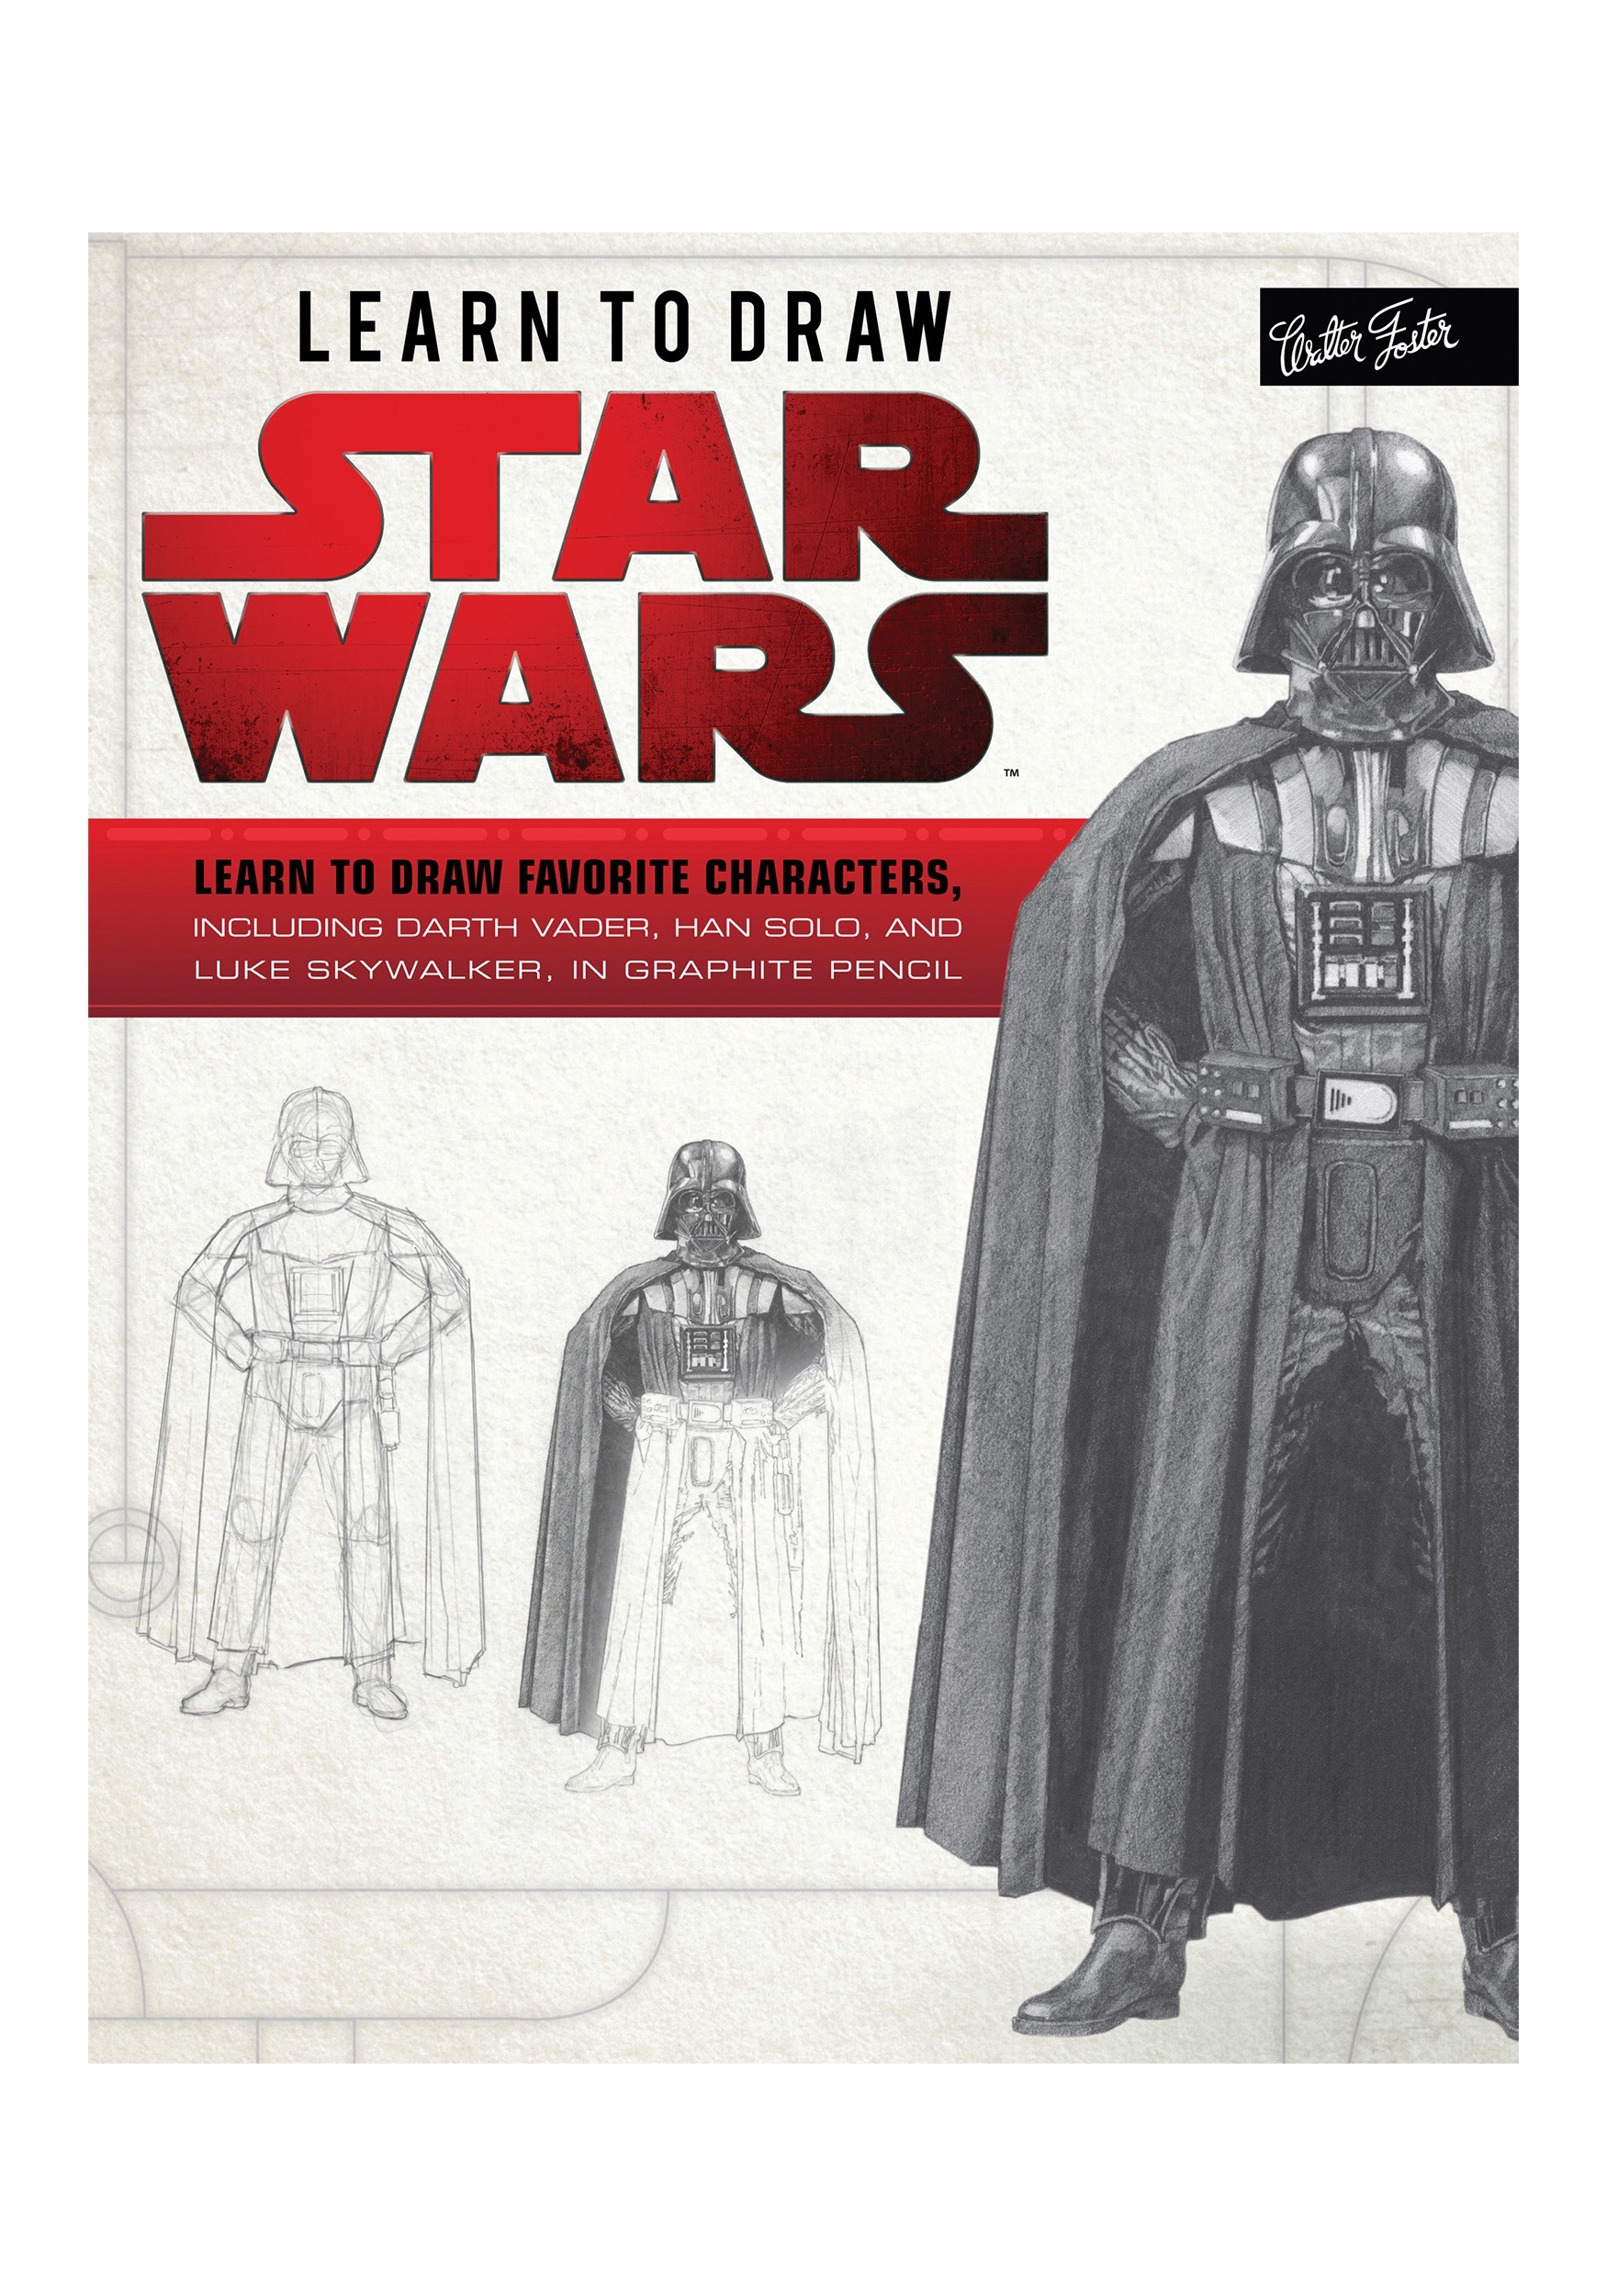 Learn to Draw Star Wars Paperback Book by Walter Foster Creative Team